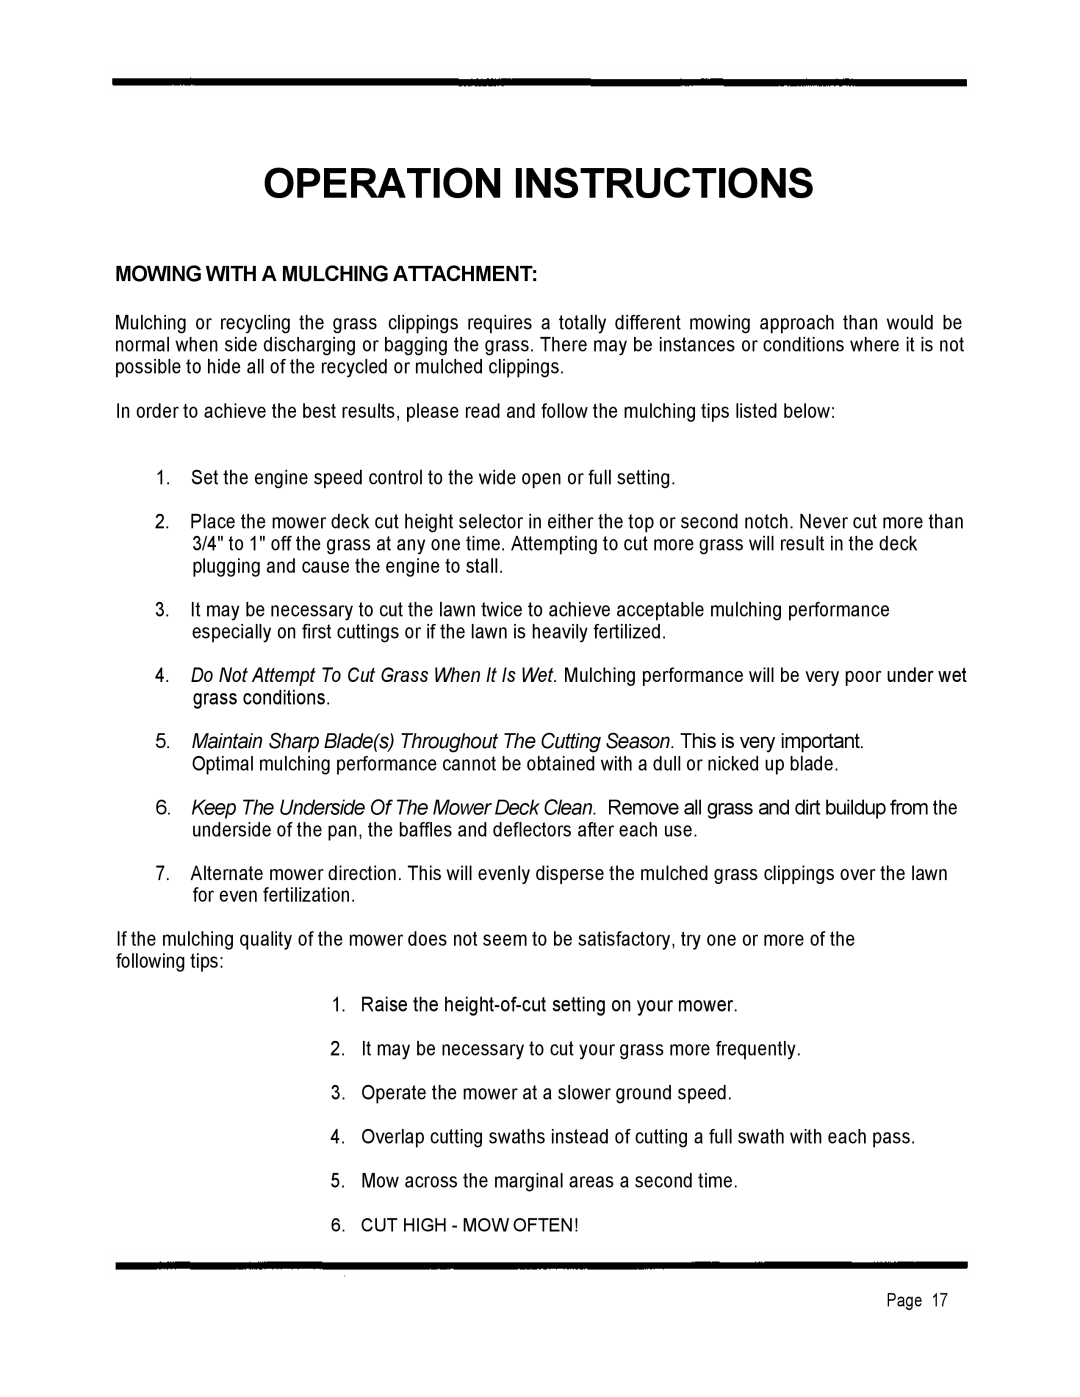 Dixon 2301 manual Operation Instructions, Mowing With A Mulching Attachment 